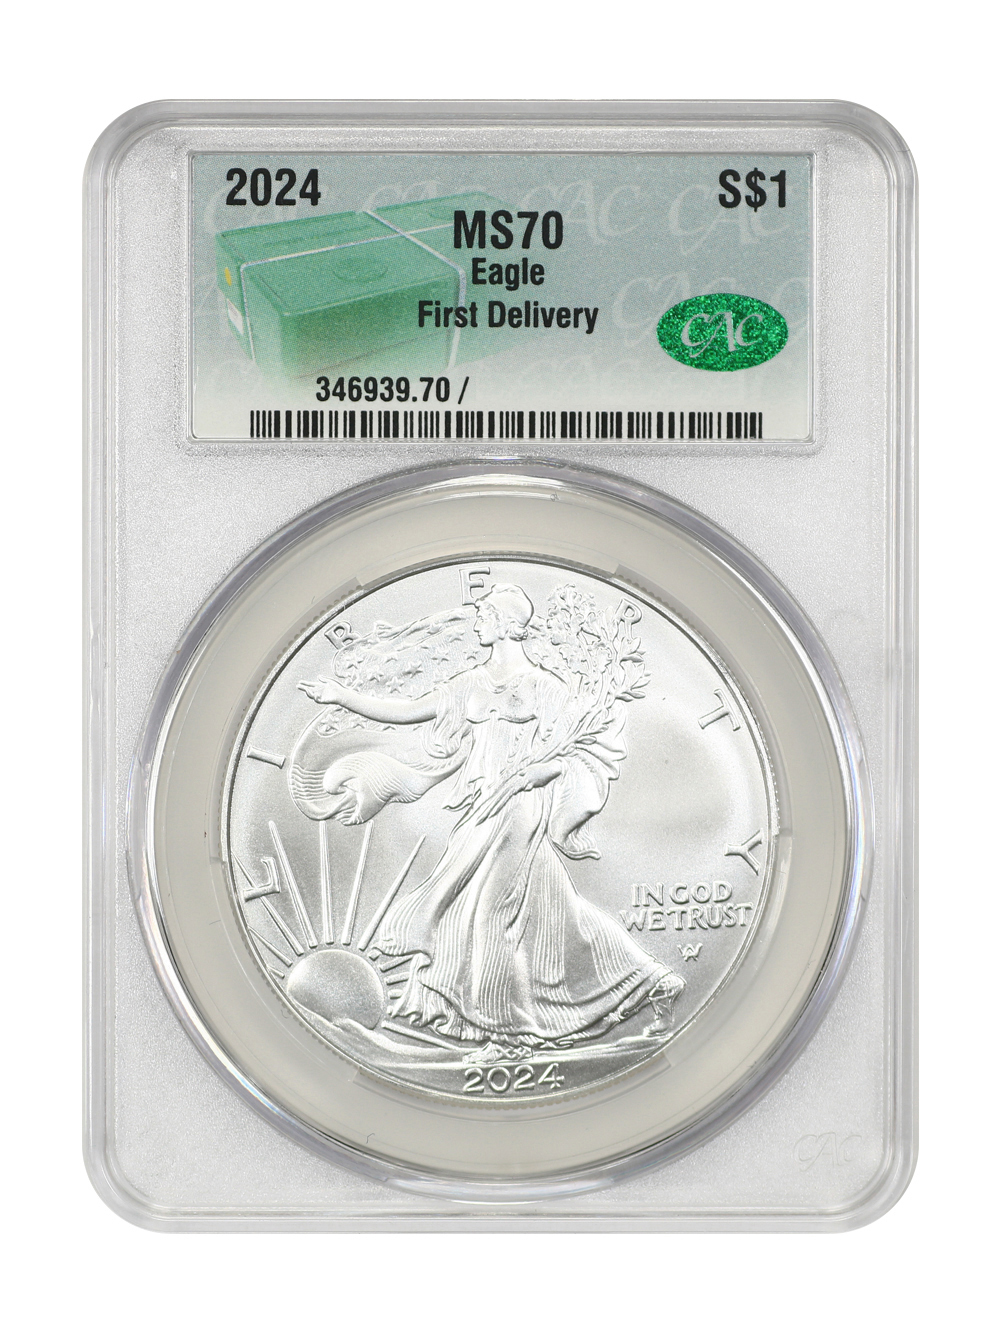 Primary image for 2024 $1 Silver Eagle CACG MS70 First Delivery (Monster Box Label)